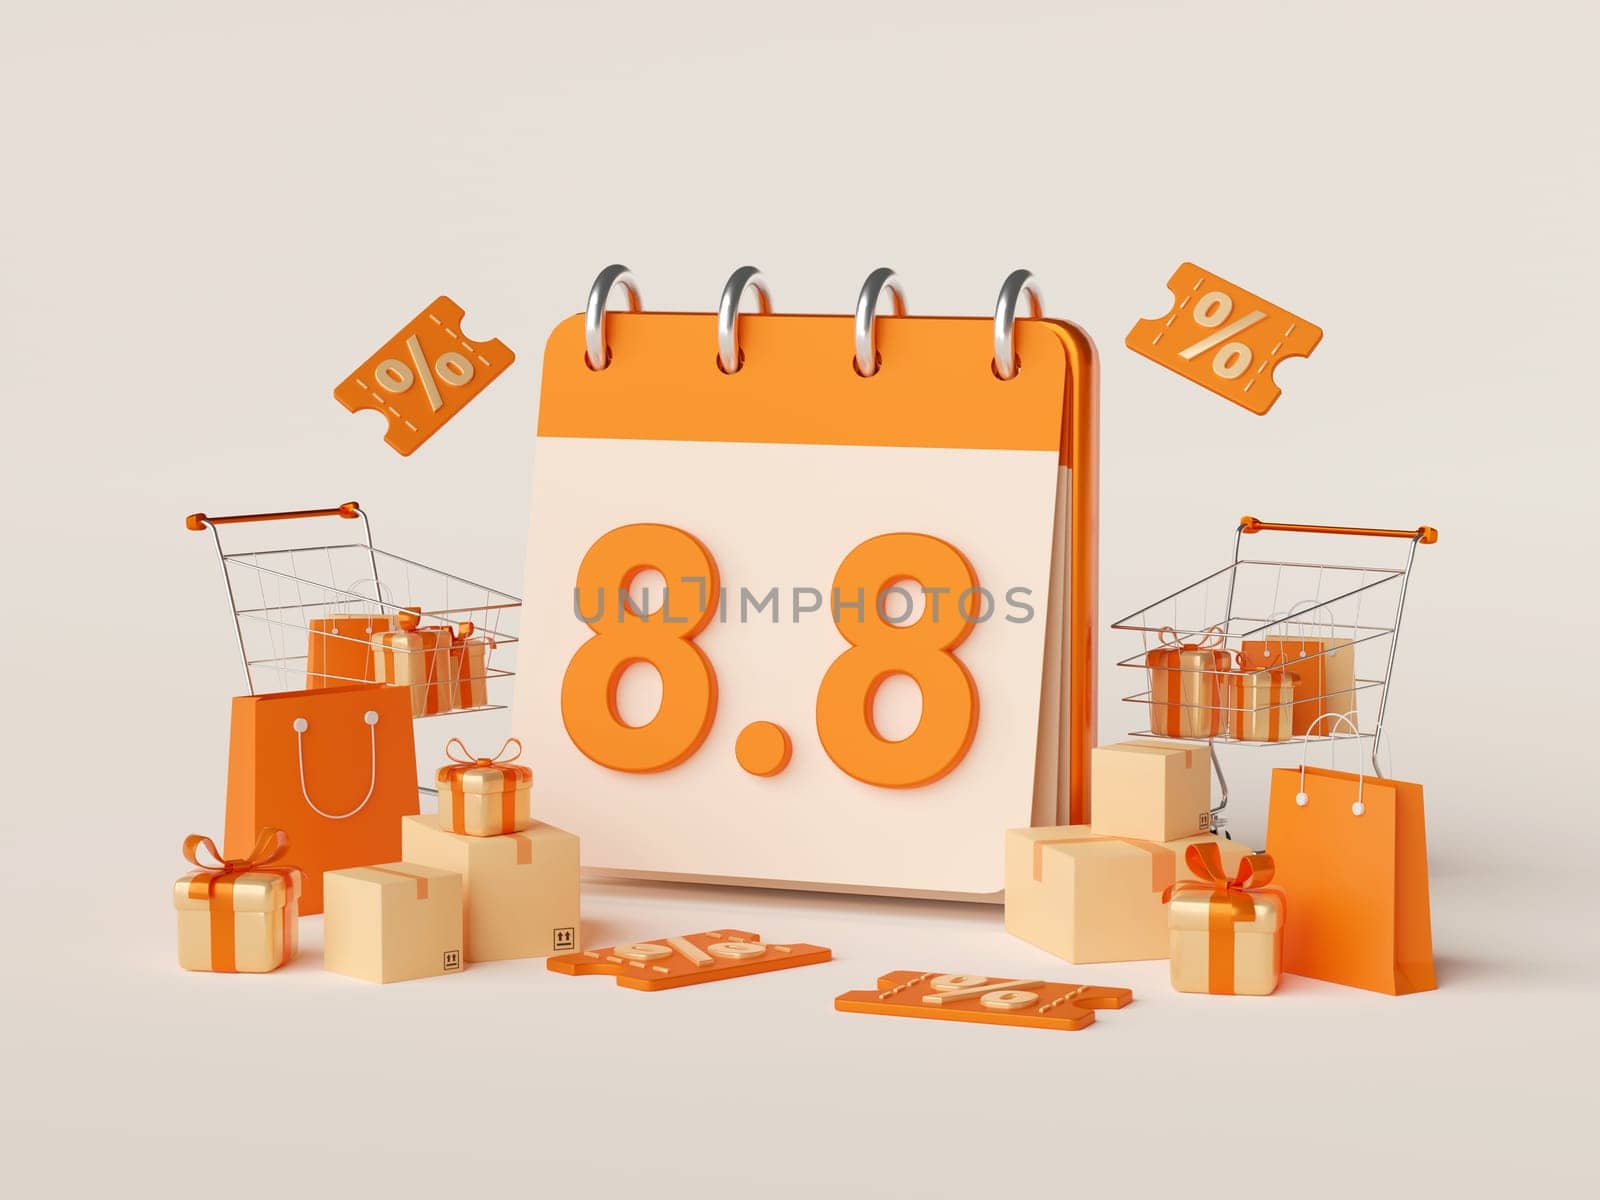 3d illustration of Promotion deal 8.8 with discount price for shopping by nutzchotwarut